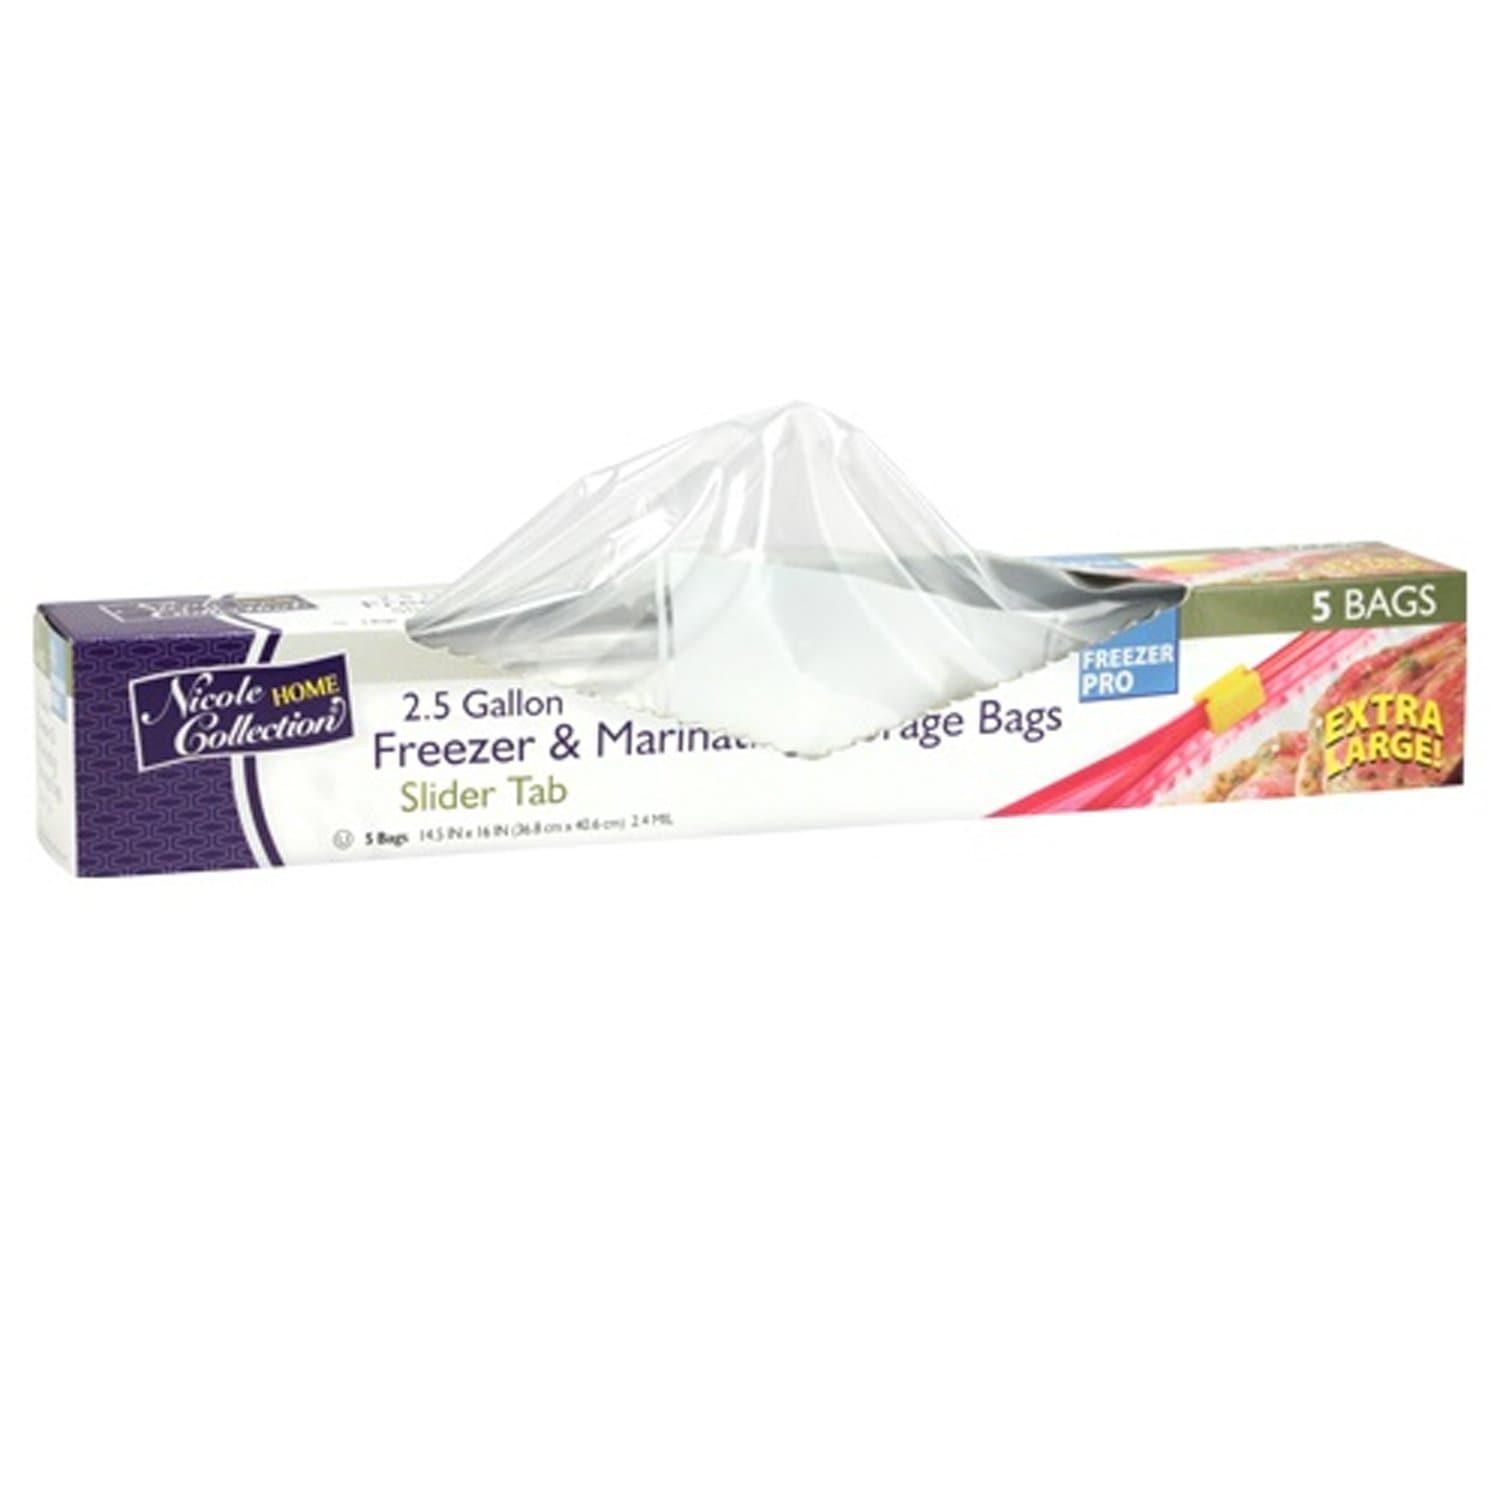 https://onlyonestopshop.com/cdn/shop/products/Nicole-Home-Collection-Freezer-Storage-Bags-with-Slide-2.5-gal-Nicole-Collection-1603927259.jpg?v=1603927261&width=1946